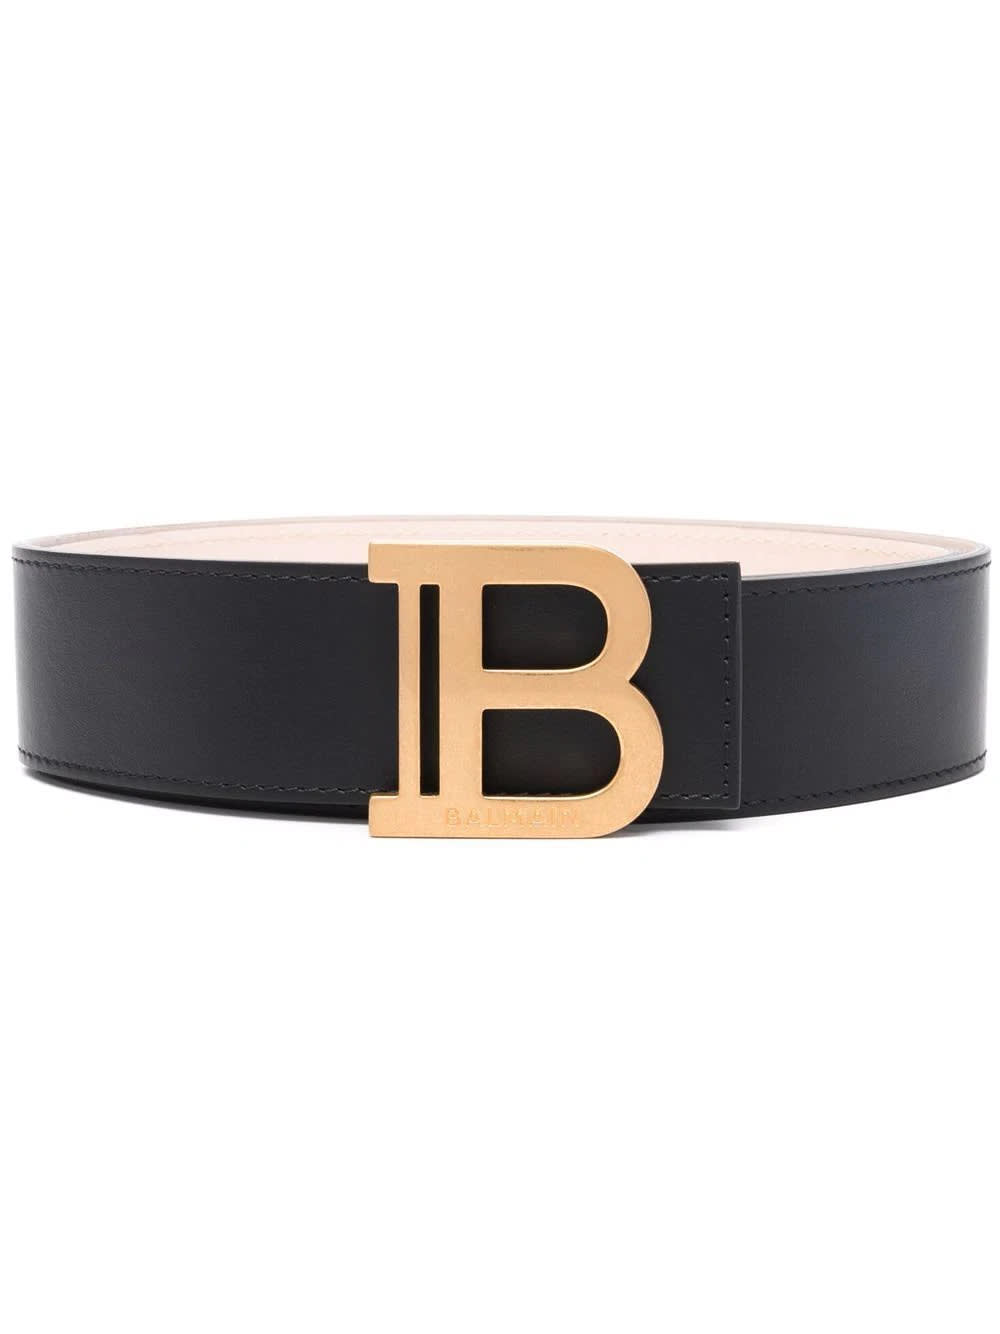 Balmain Woman Black And Gold b Belt In Smooth Leather 4cm